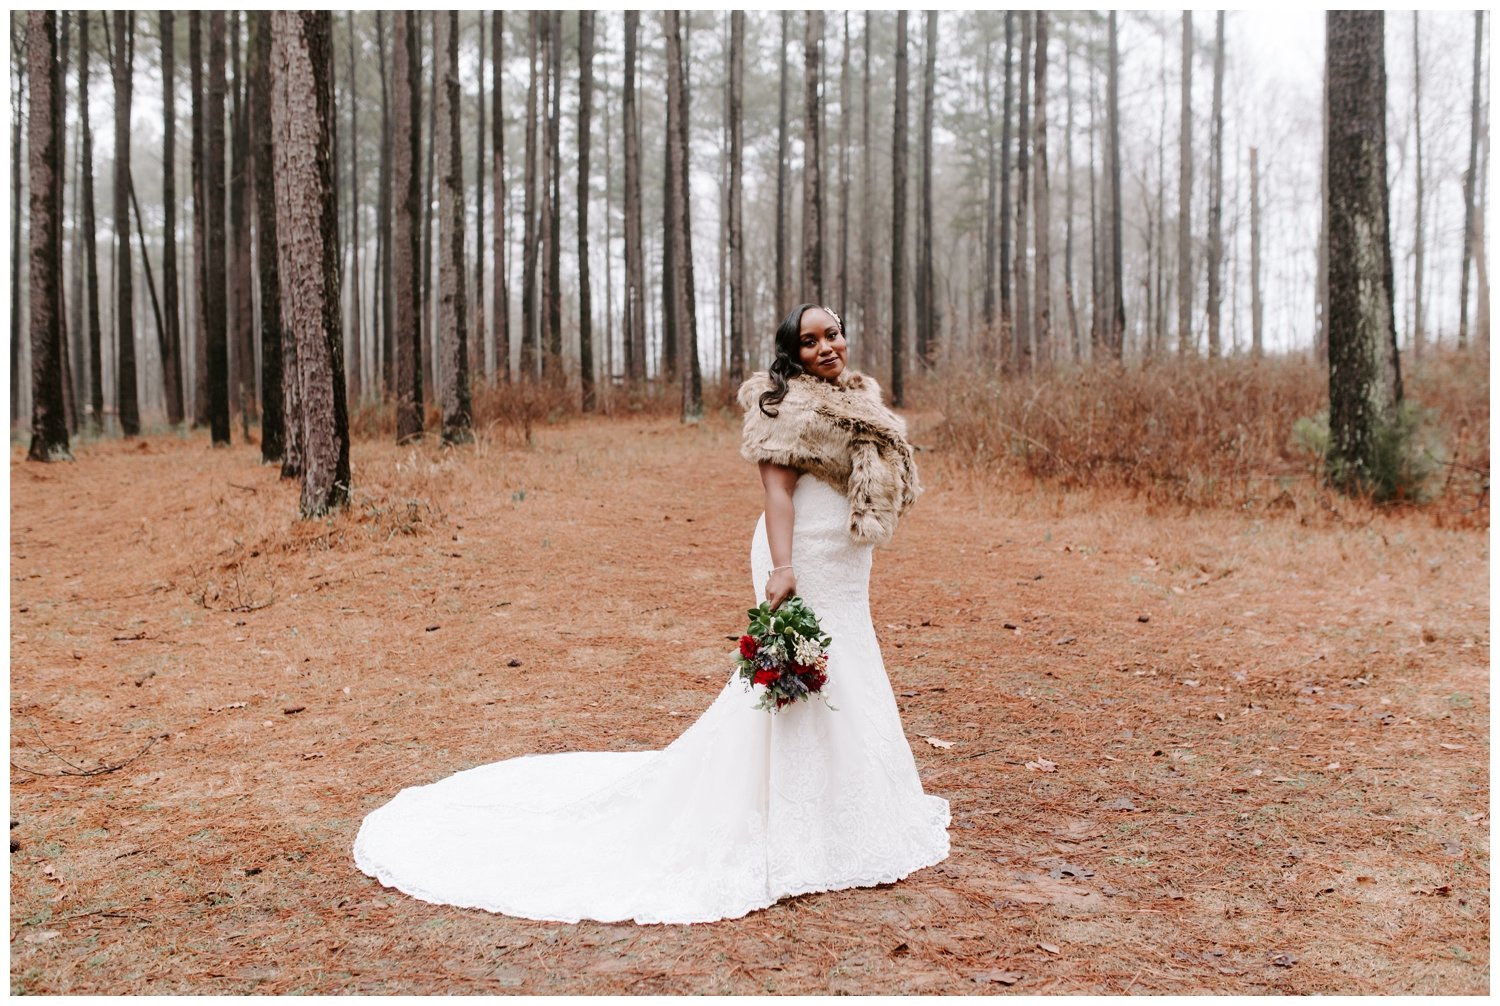 A bride wears a fur stole in the woods